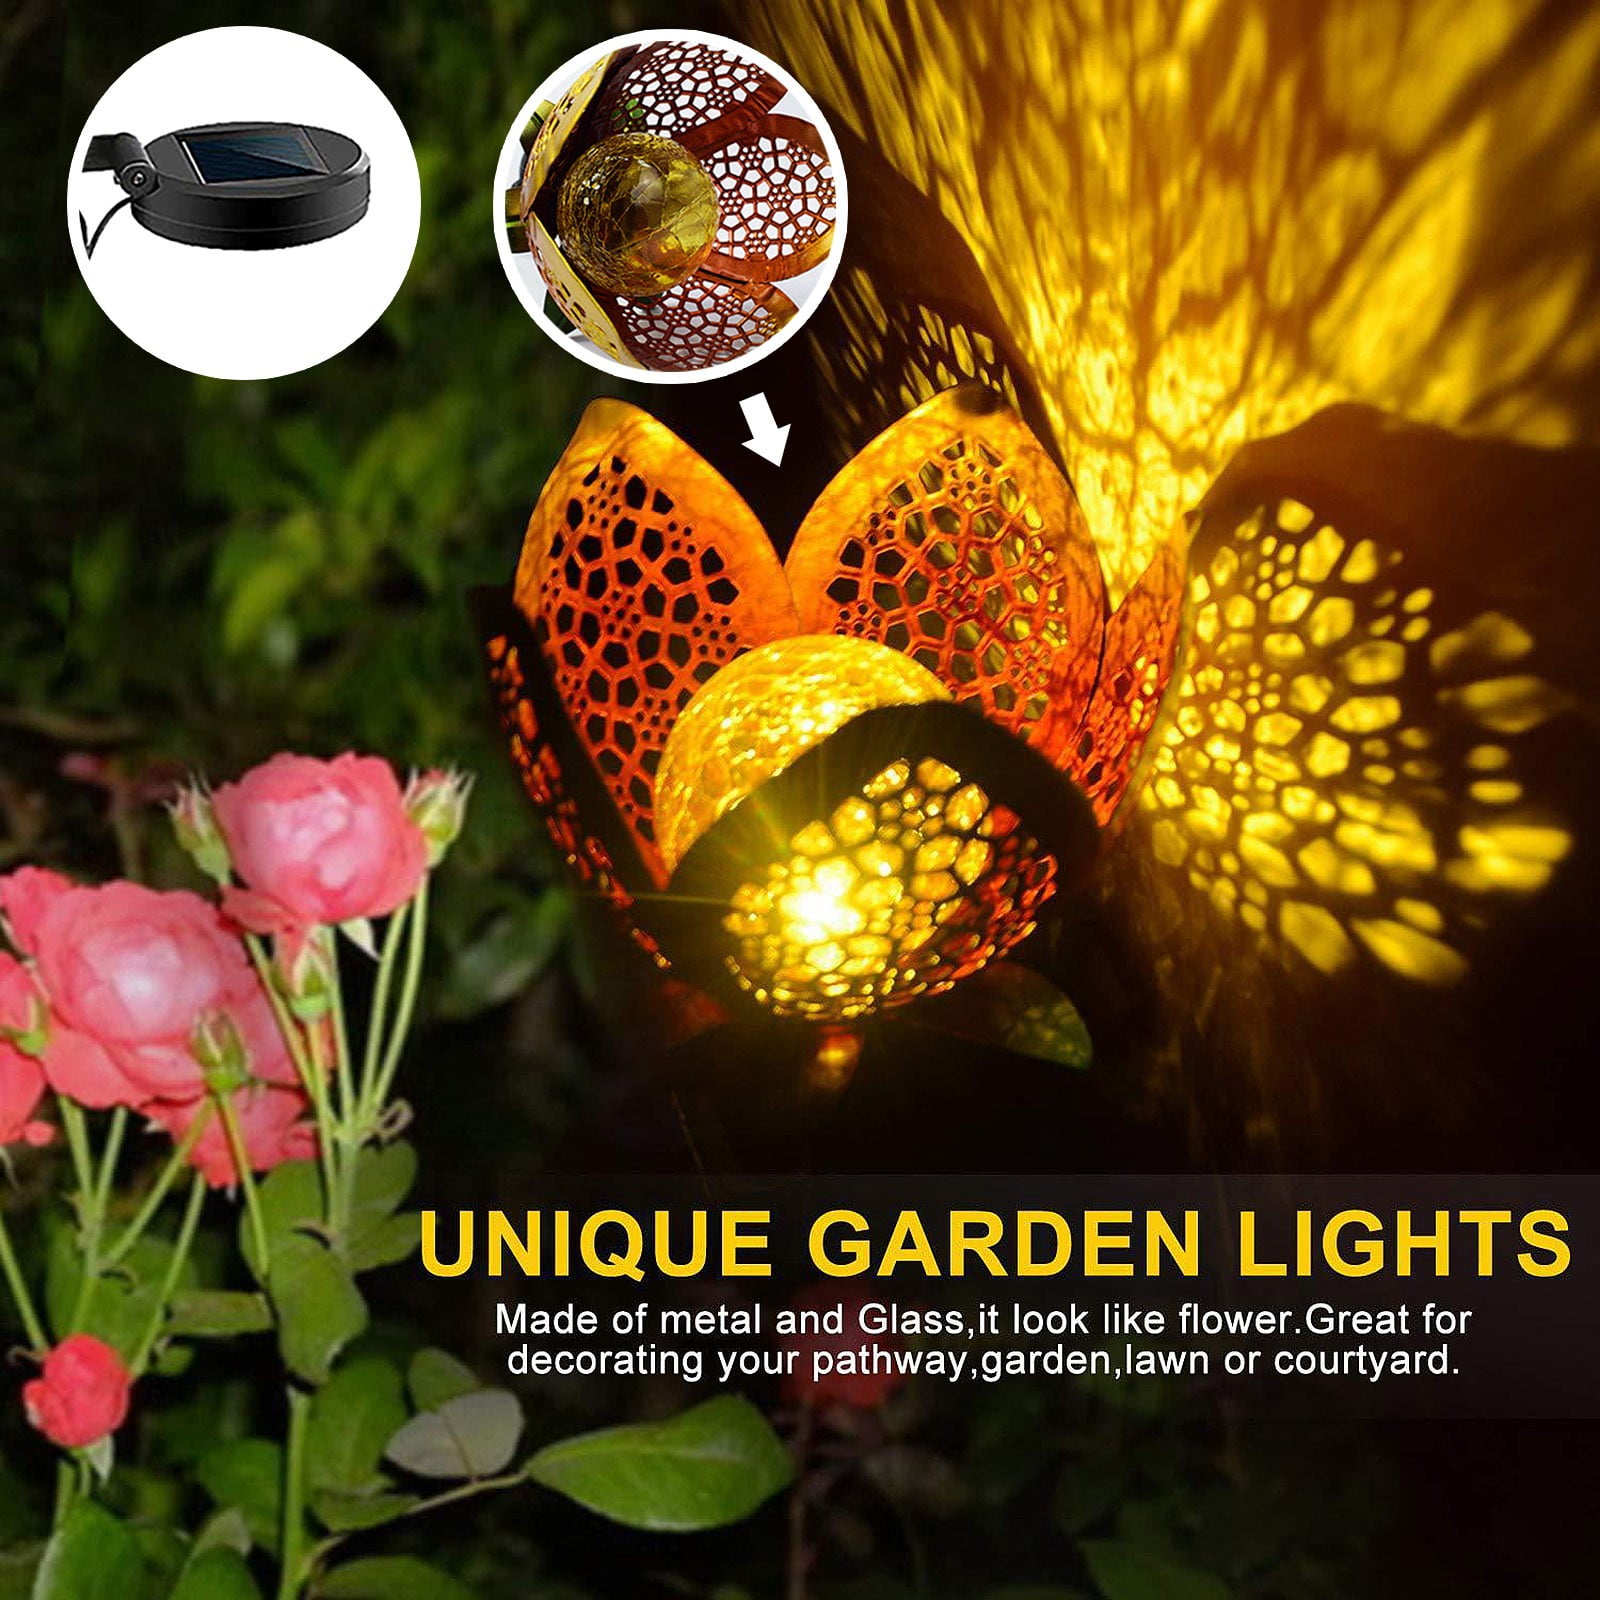 Solar LED Projection Light Garden Lawn Hollow Lamp Colorful Outdoor Lighting